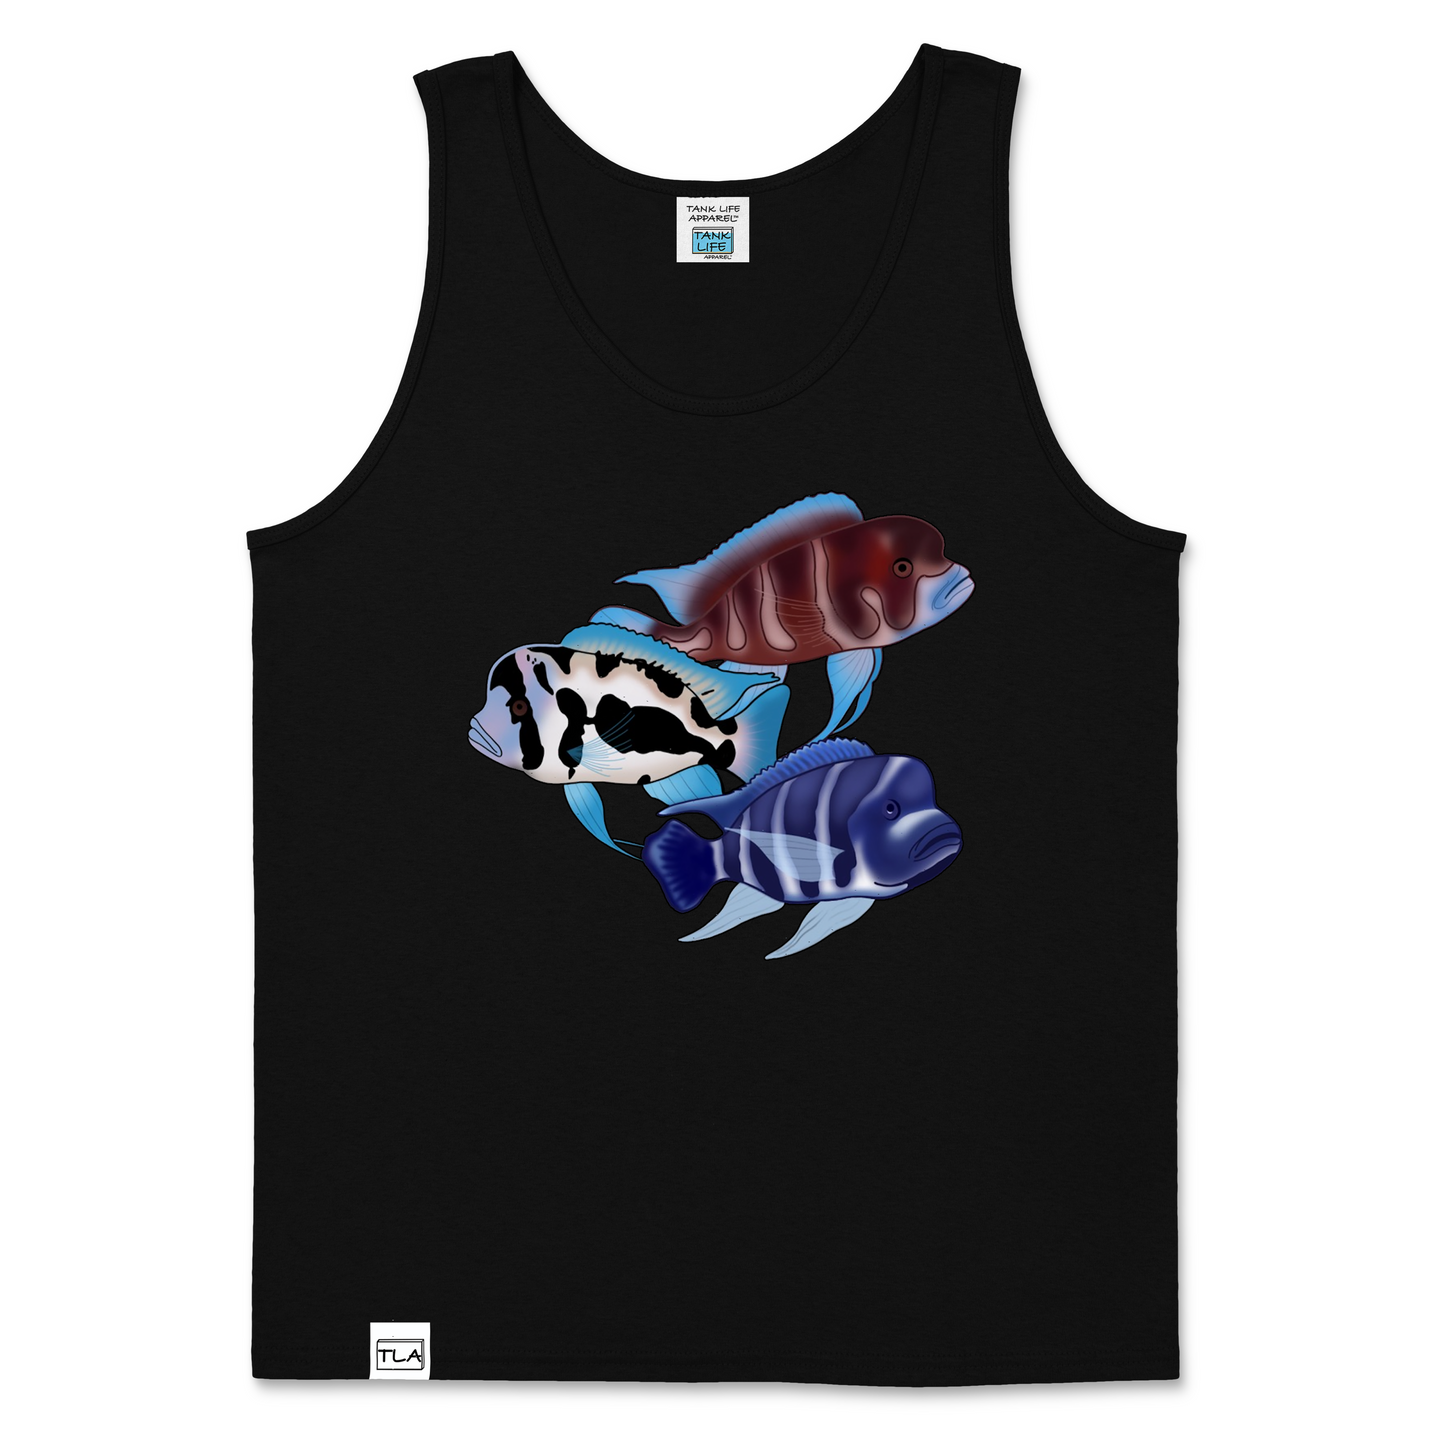 The Tank Life Apparel frontosa cichlid design on a men's tank top with our custom TLA hem label. Three fish Black widow, red frontosa, blue zaire. Blue fish with dark stripes.